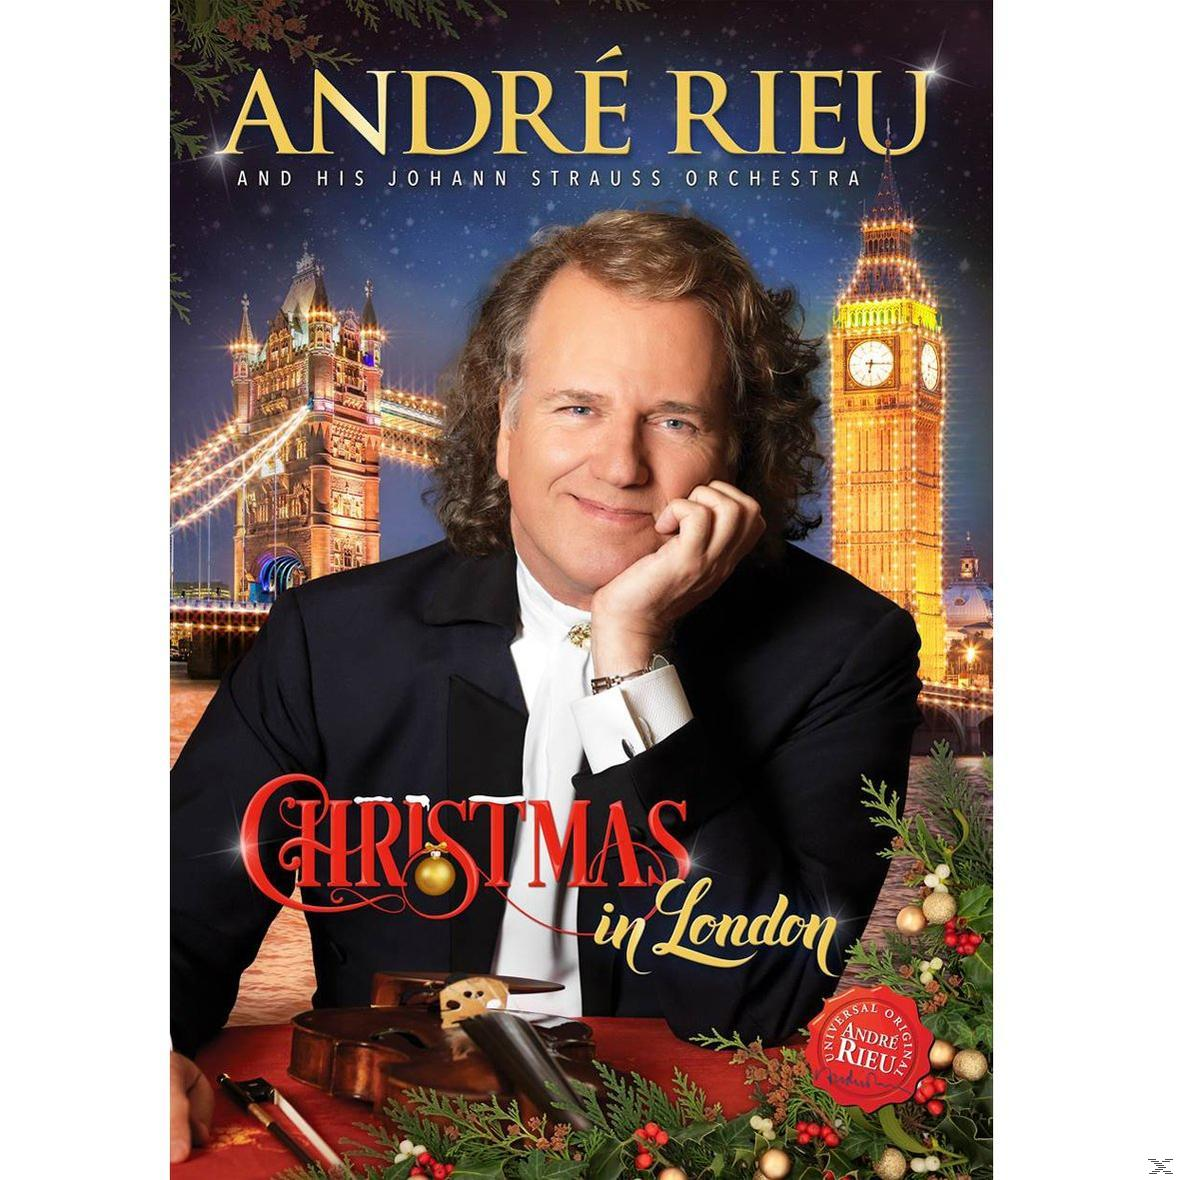 André Rieu (DVD) London - In Christmas -